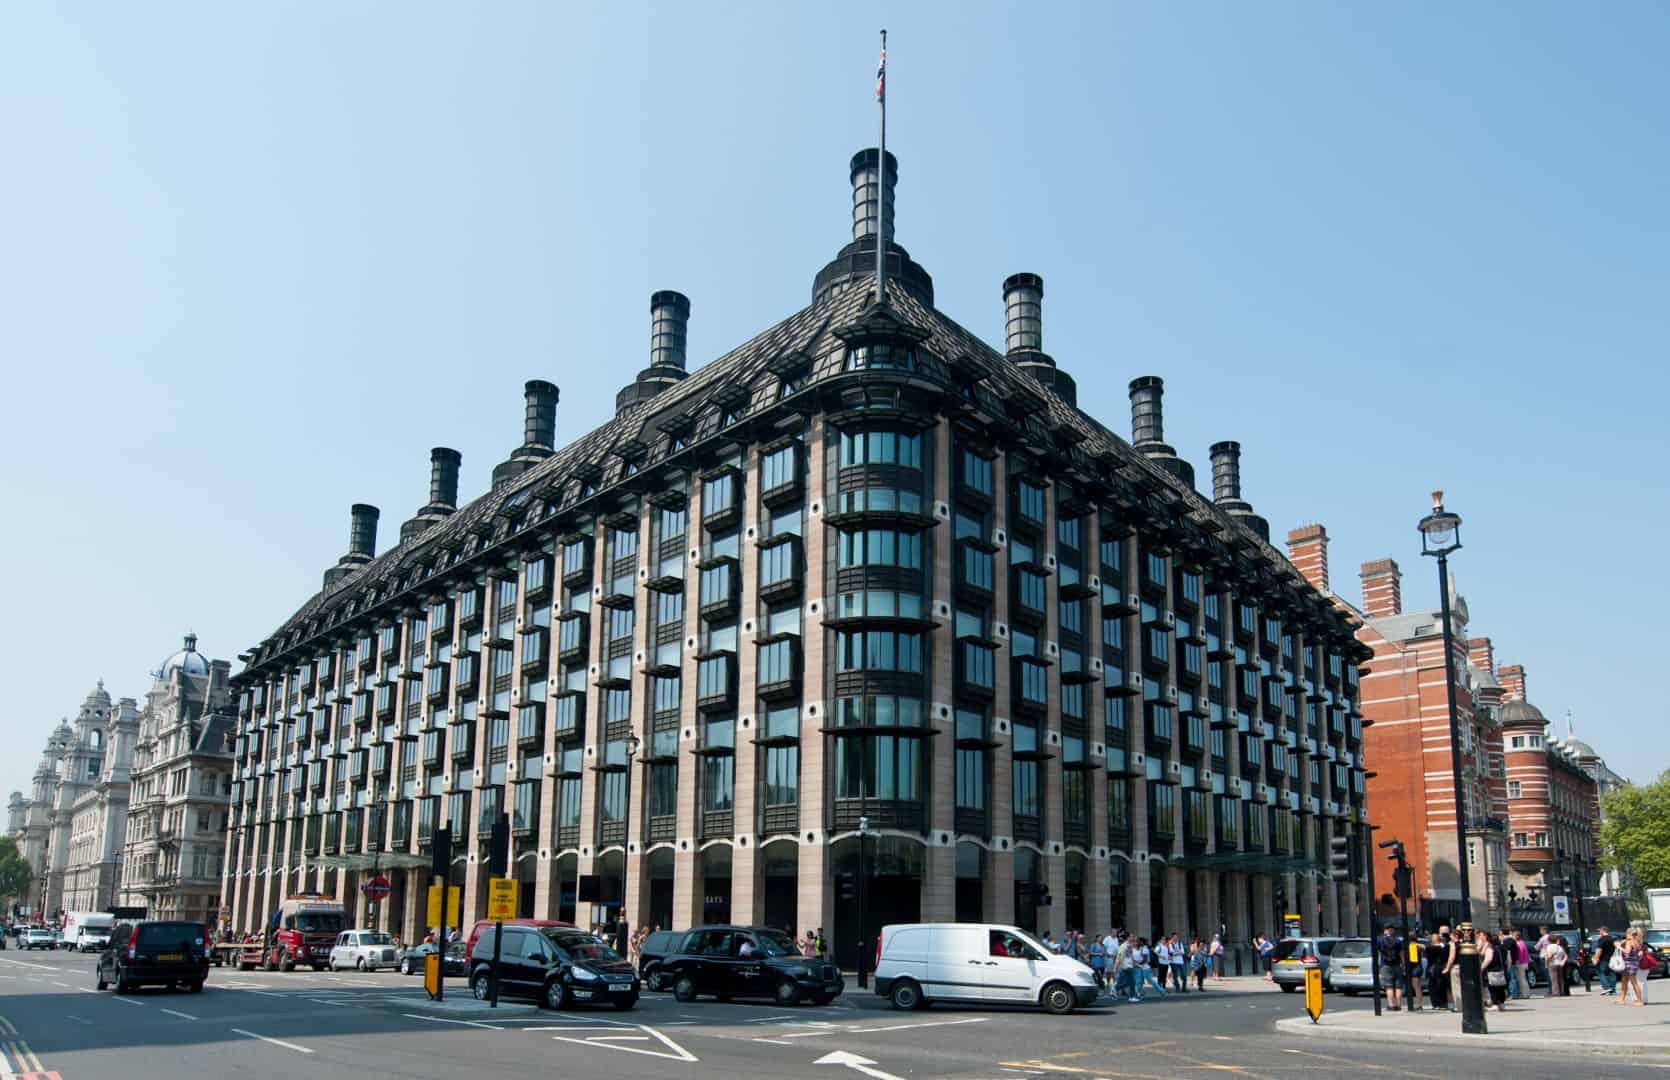 Parliament spends £28,000 on furniture for Portcullis House